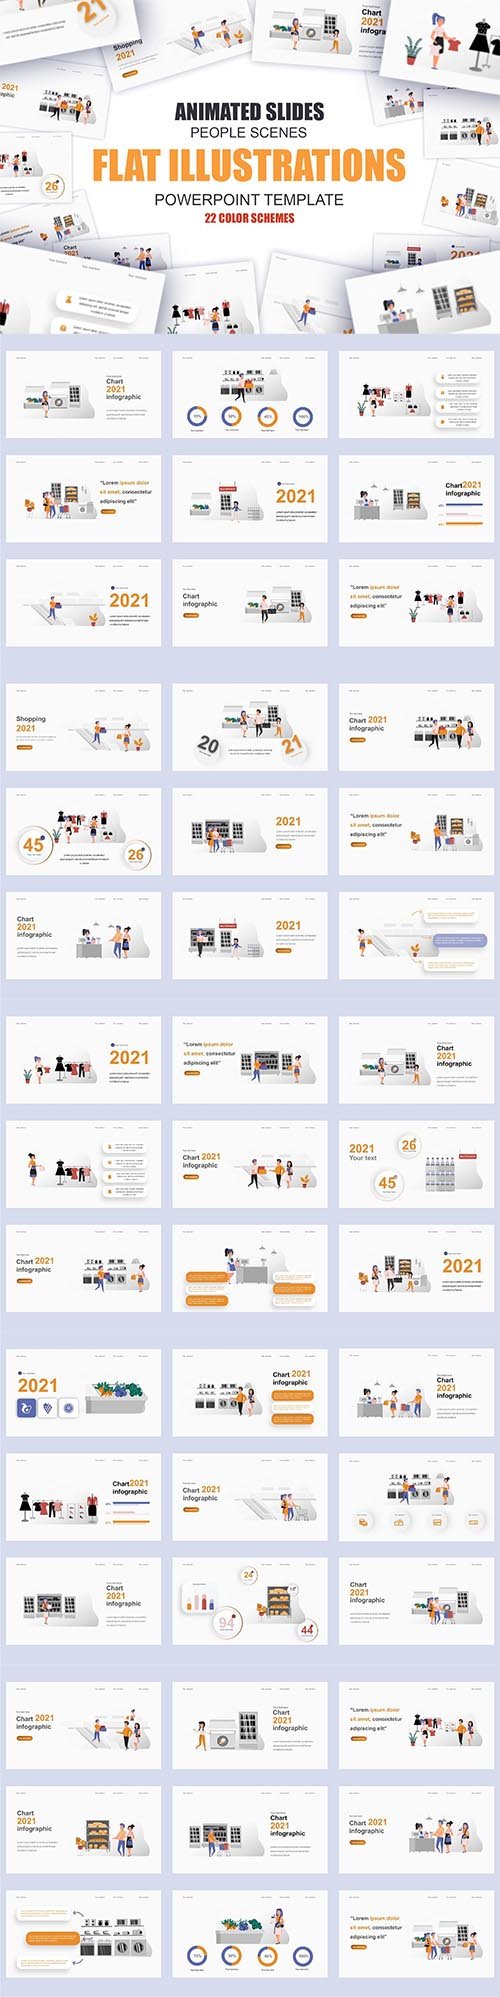 Shopping Illustration Powerpoint Template